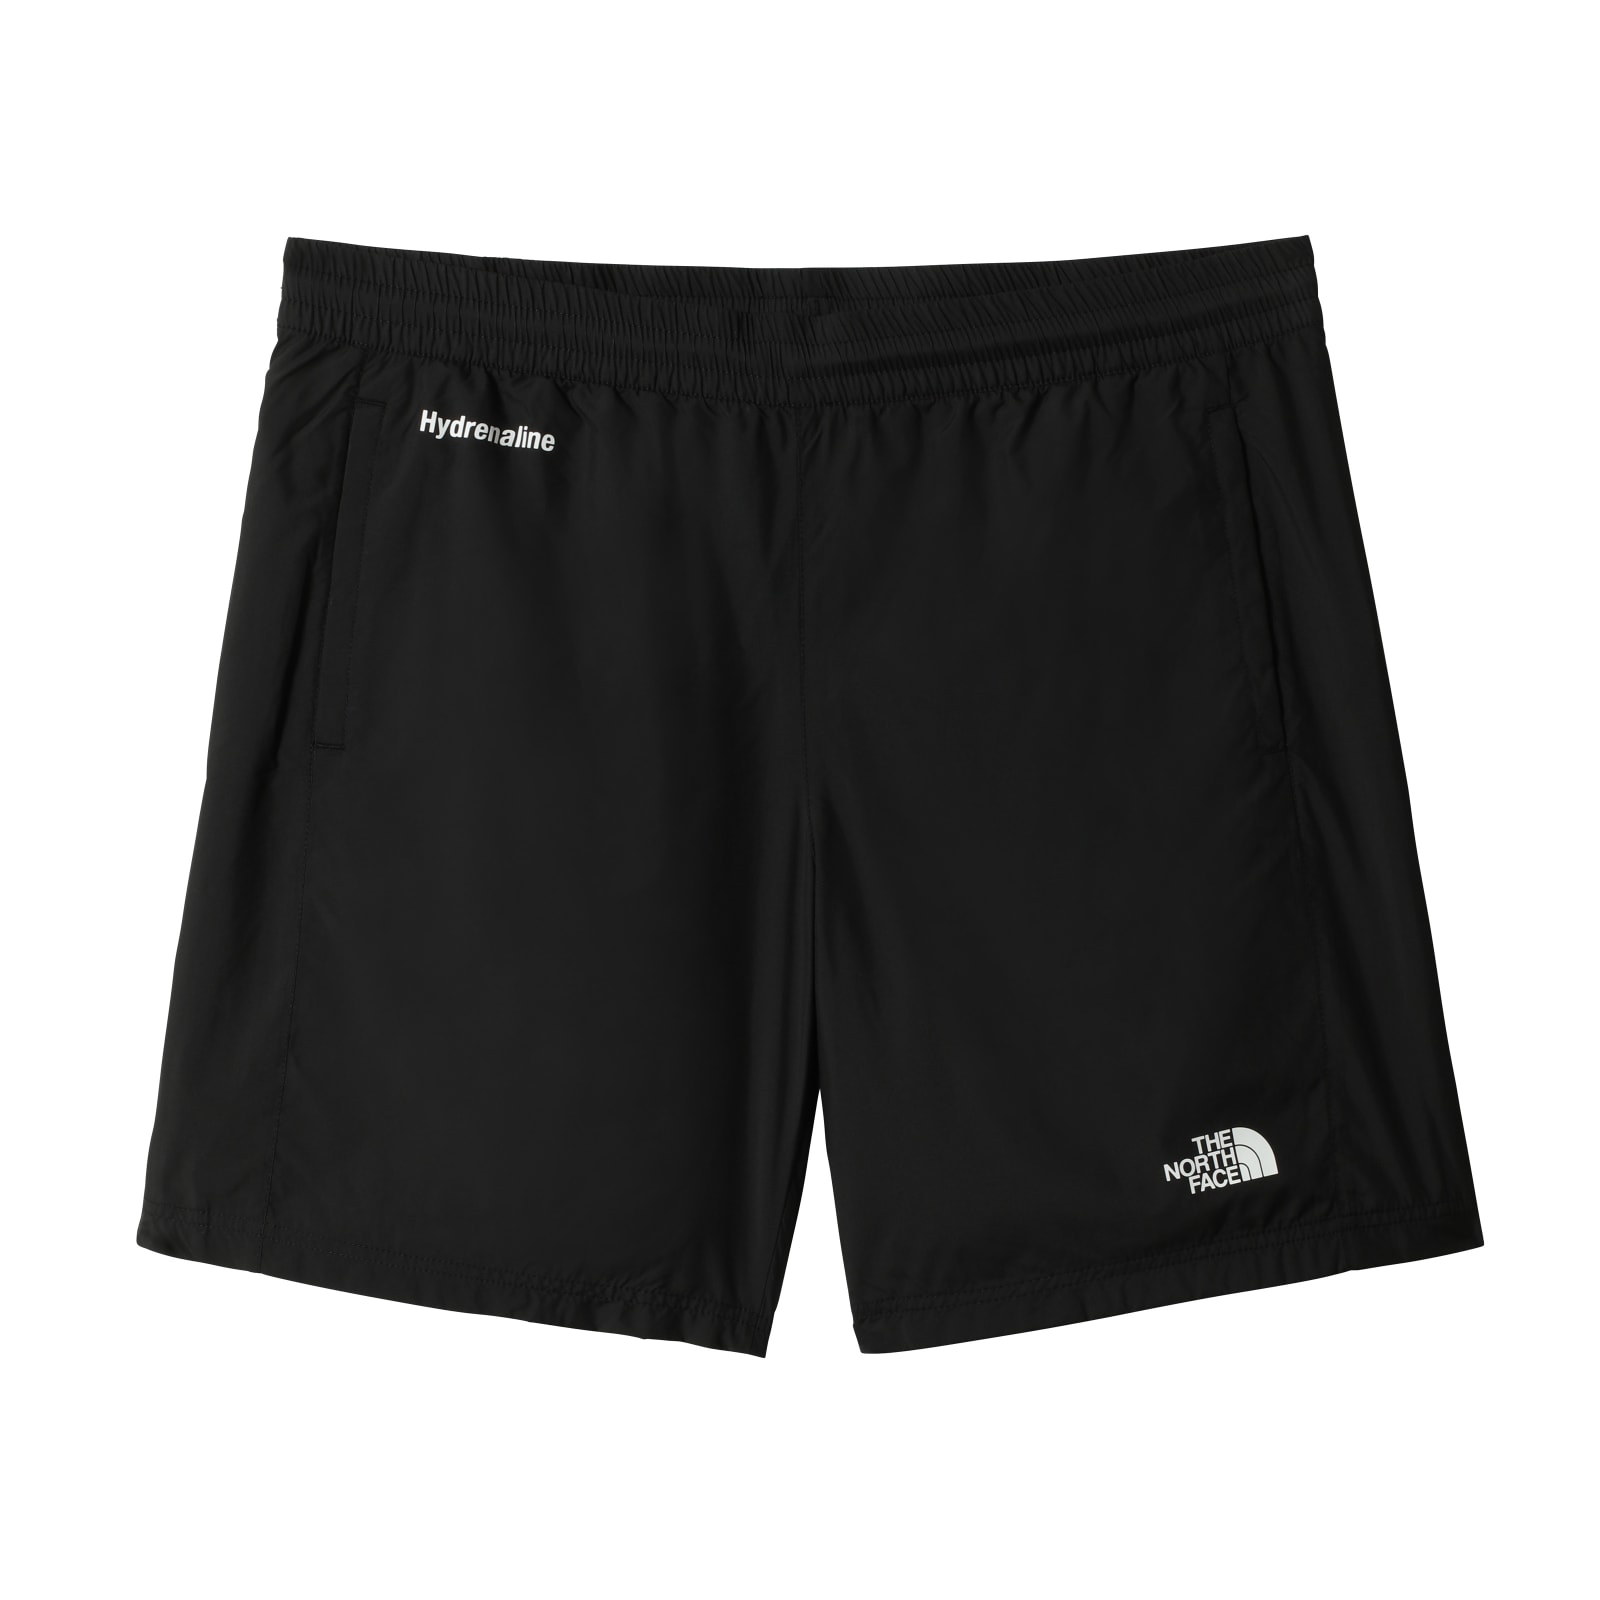 The North Face M Hydrenaline Short 2003